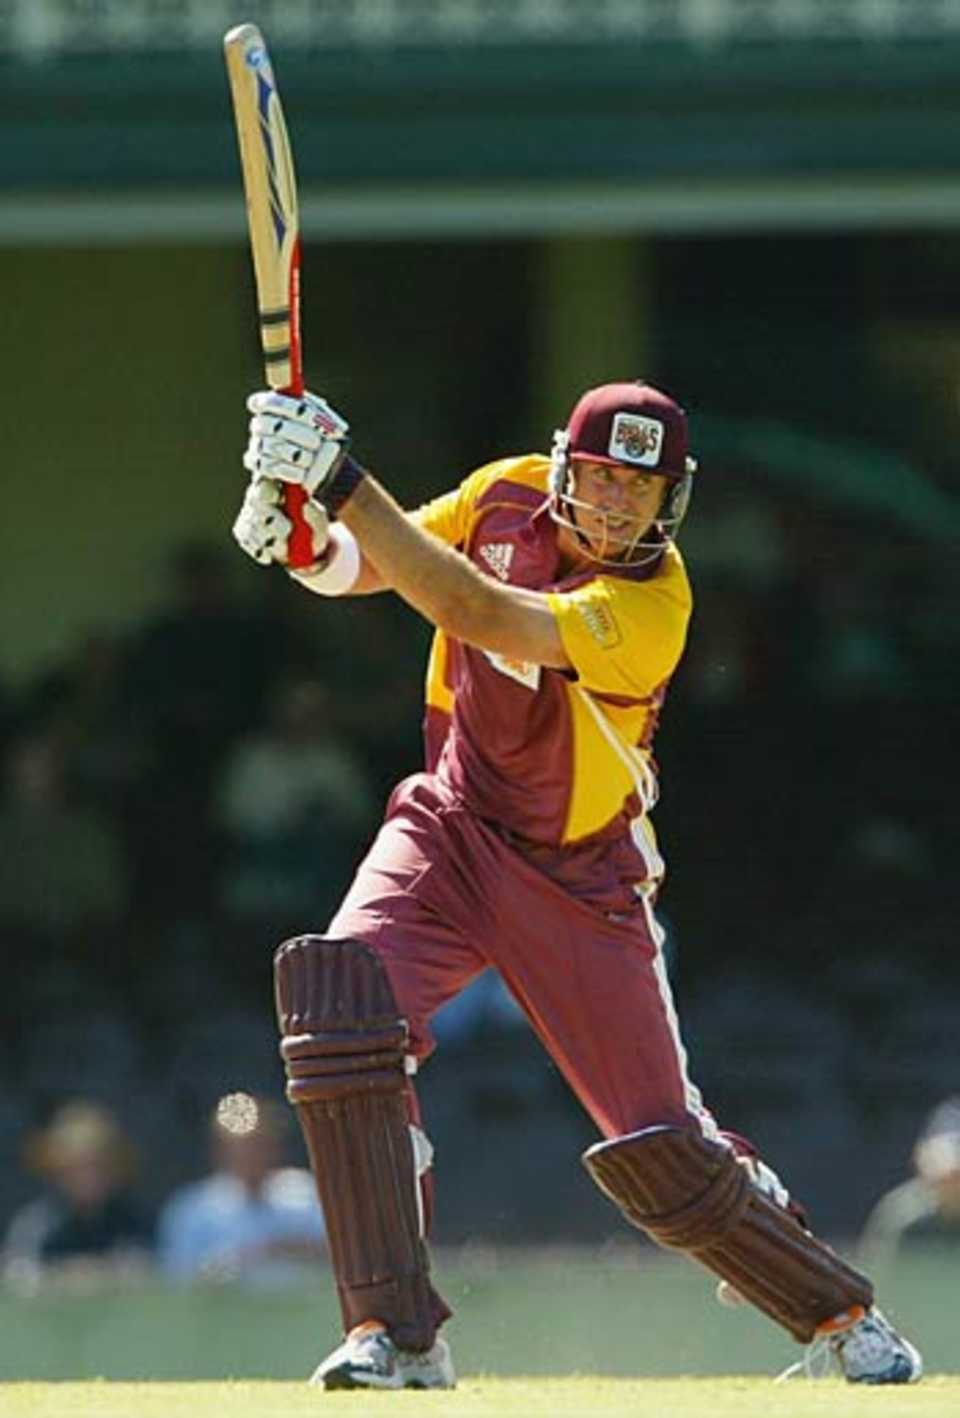 Matthew Hayden square drives on his way to a blistering 83 off 63 balls, New South Wales v Queensland, Sydney, November 13, 2005